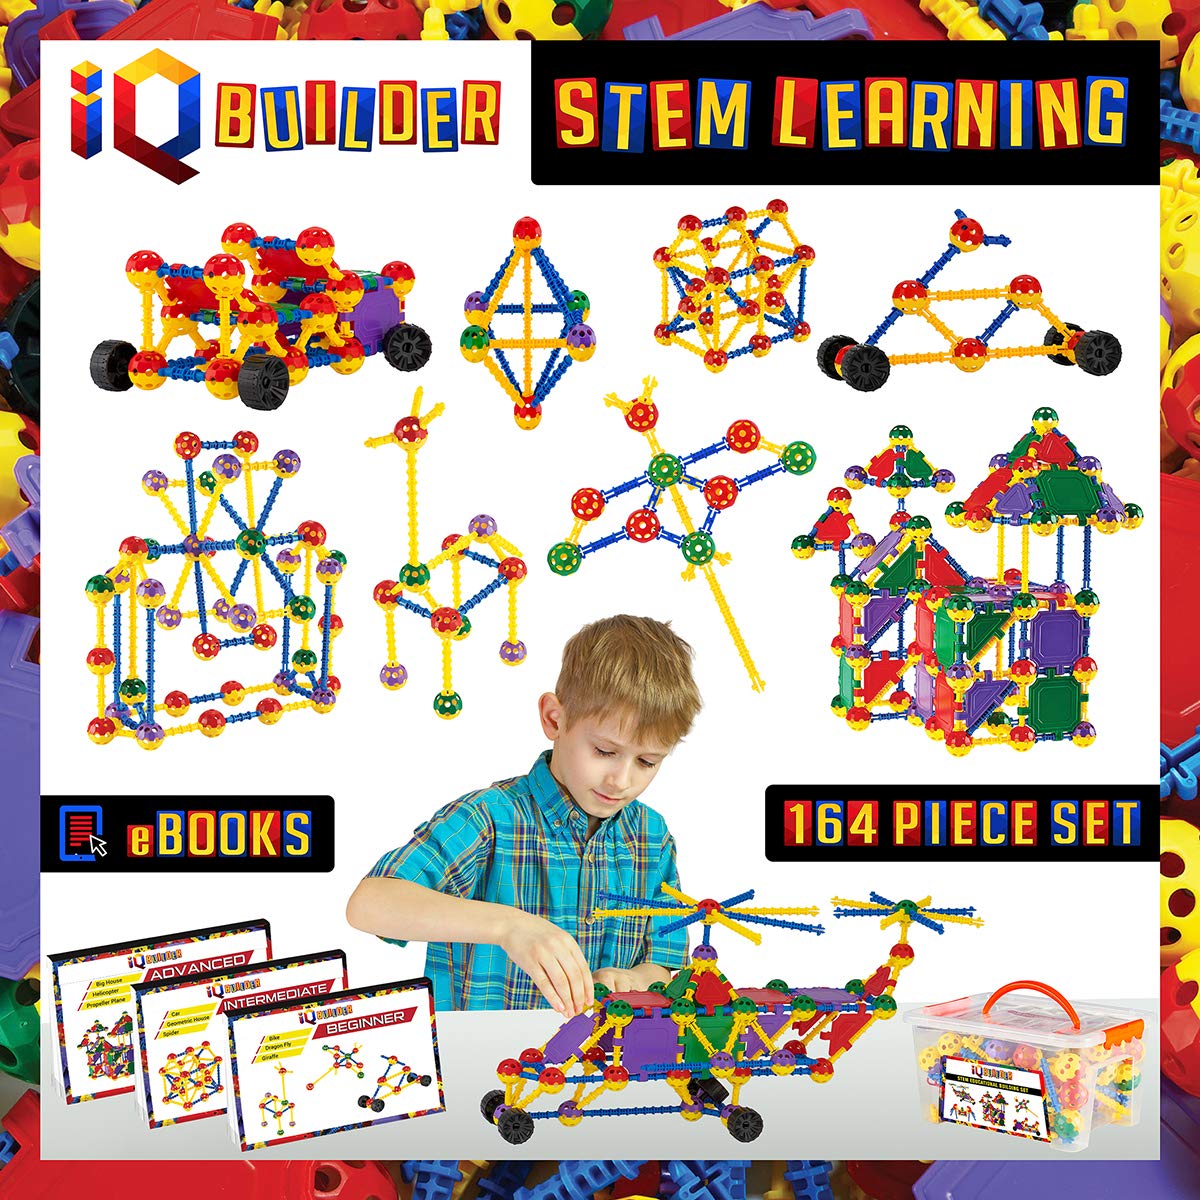 IQ BUILDER | STEM Learning Toys | Creative Construction Engineering